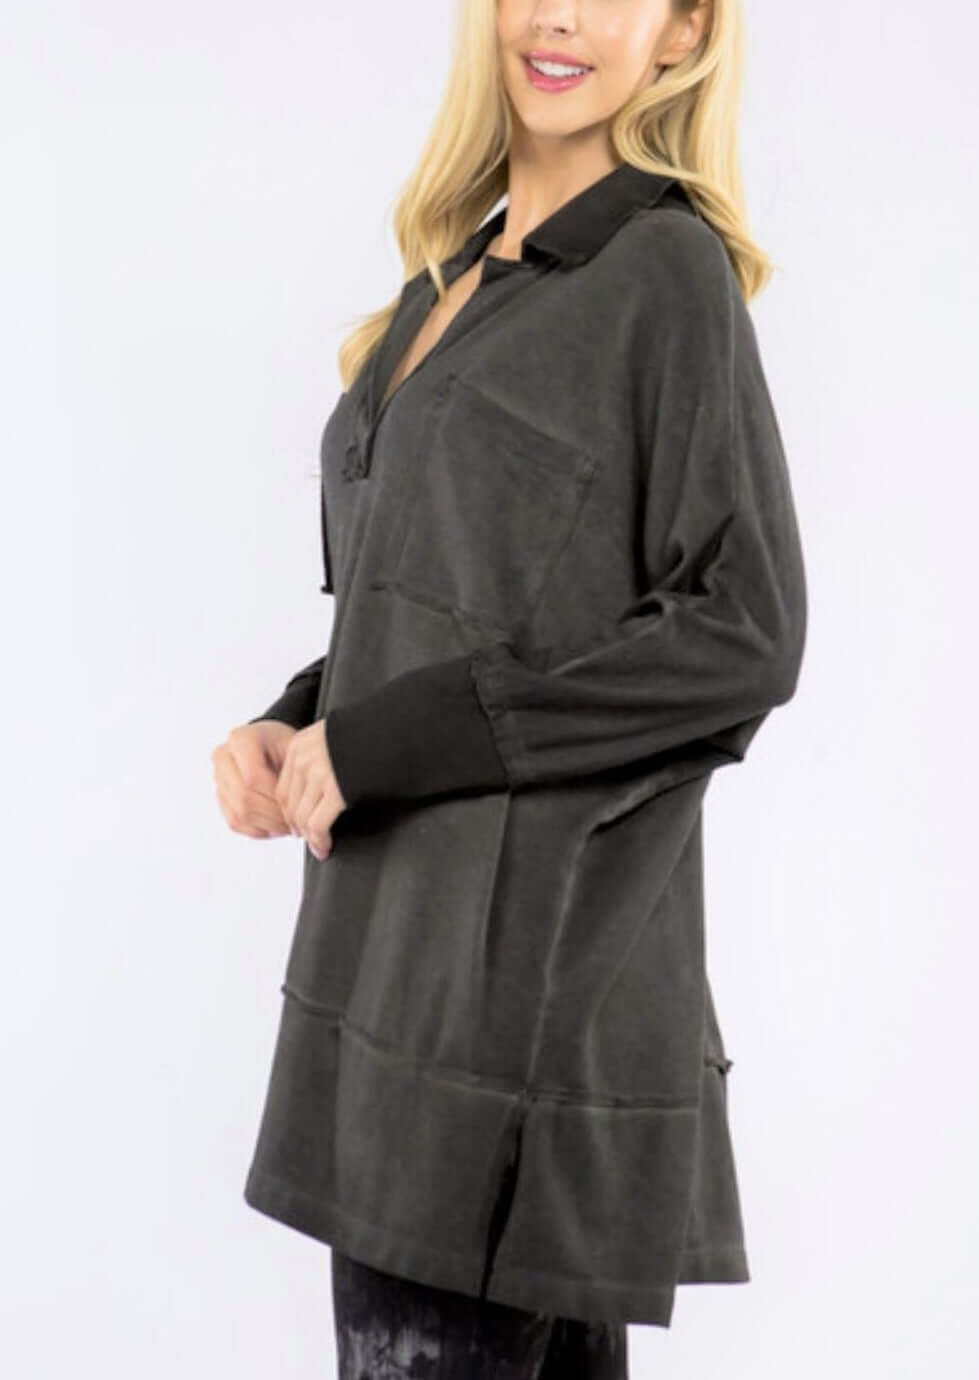 USA Made Ladies Oil Washed Premium French Terry Tunic with Front Pocket in Charcoal Gray Color |  M. Rena Style# S5037 | Women's Made in America Clothing